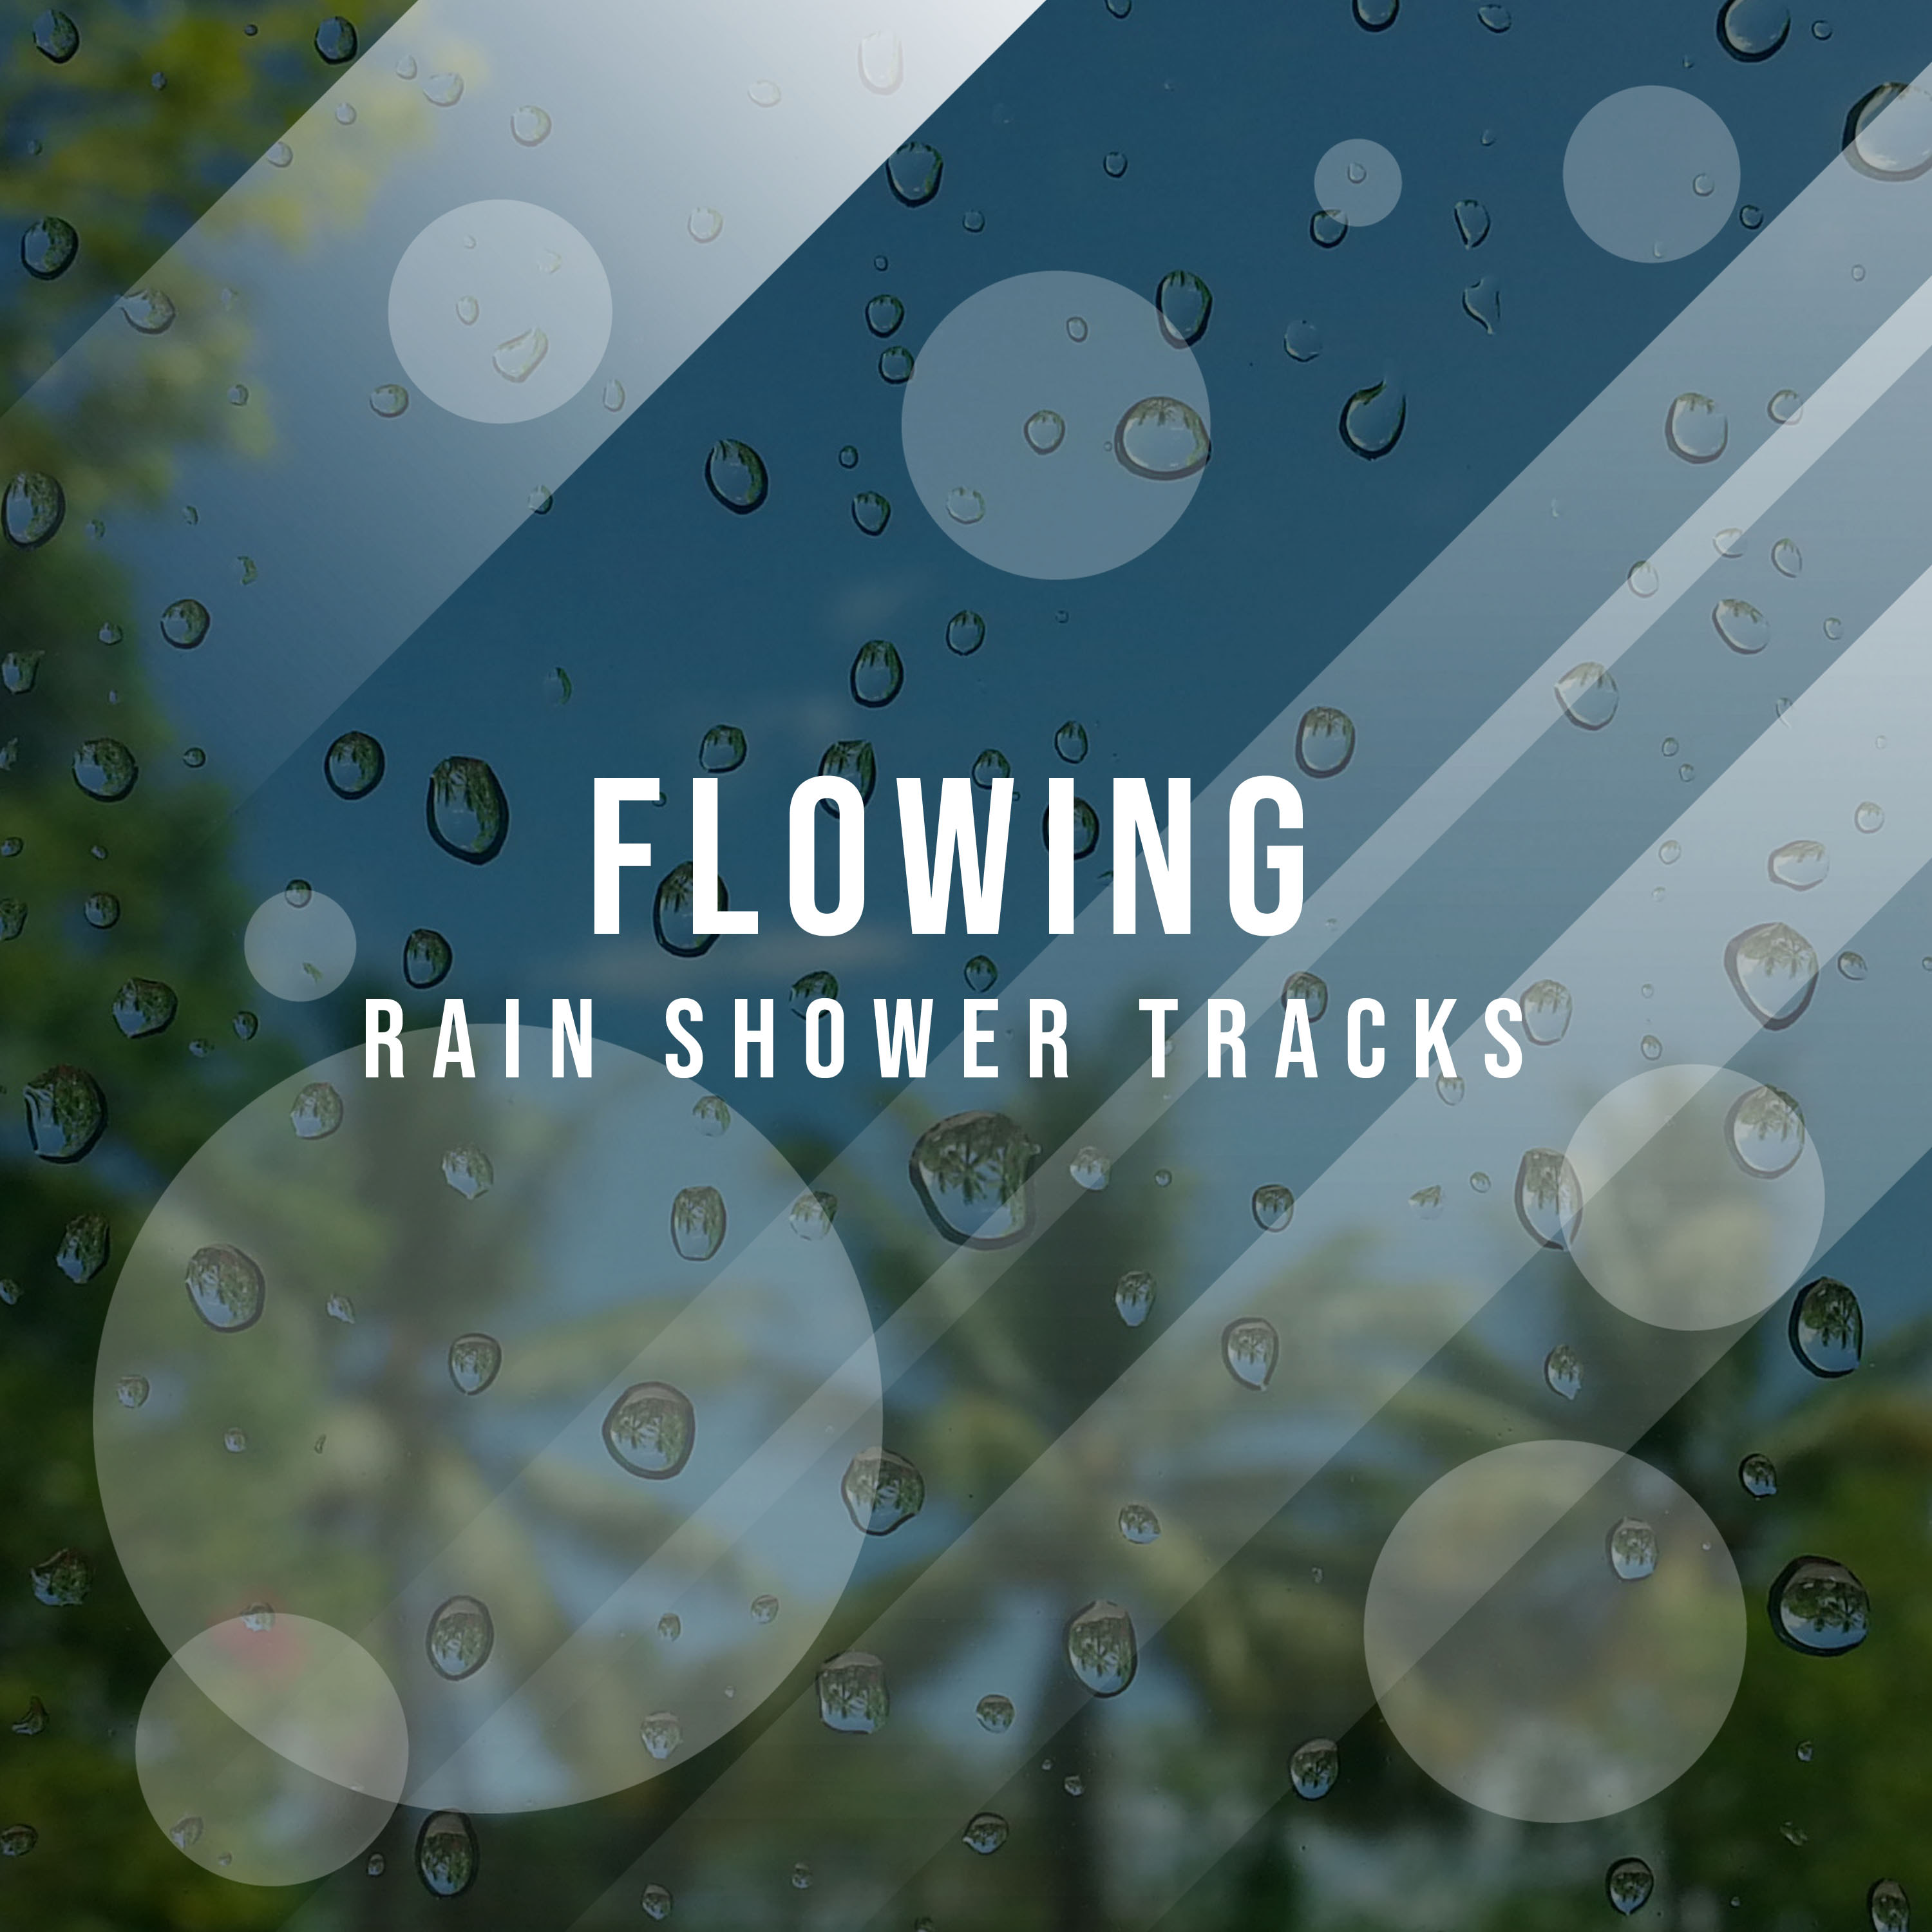 #19 Flowing Rain Shower Tracks for Sleep and Relaxation